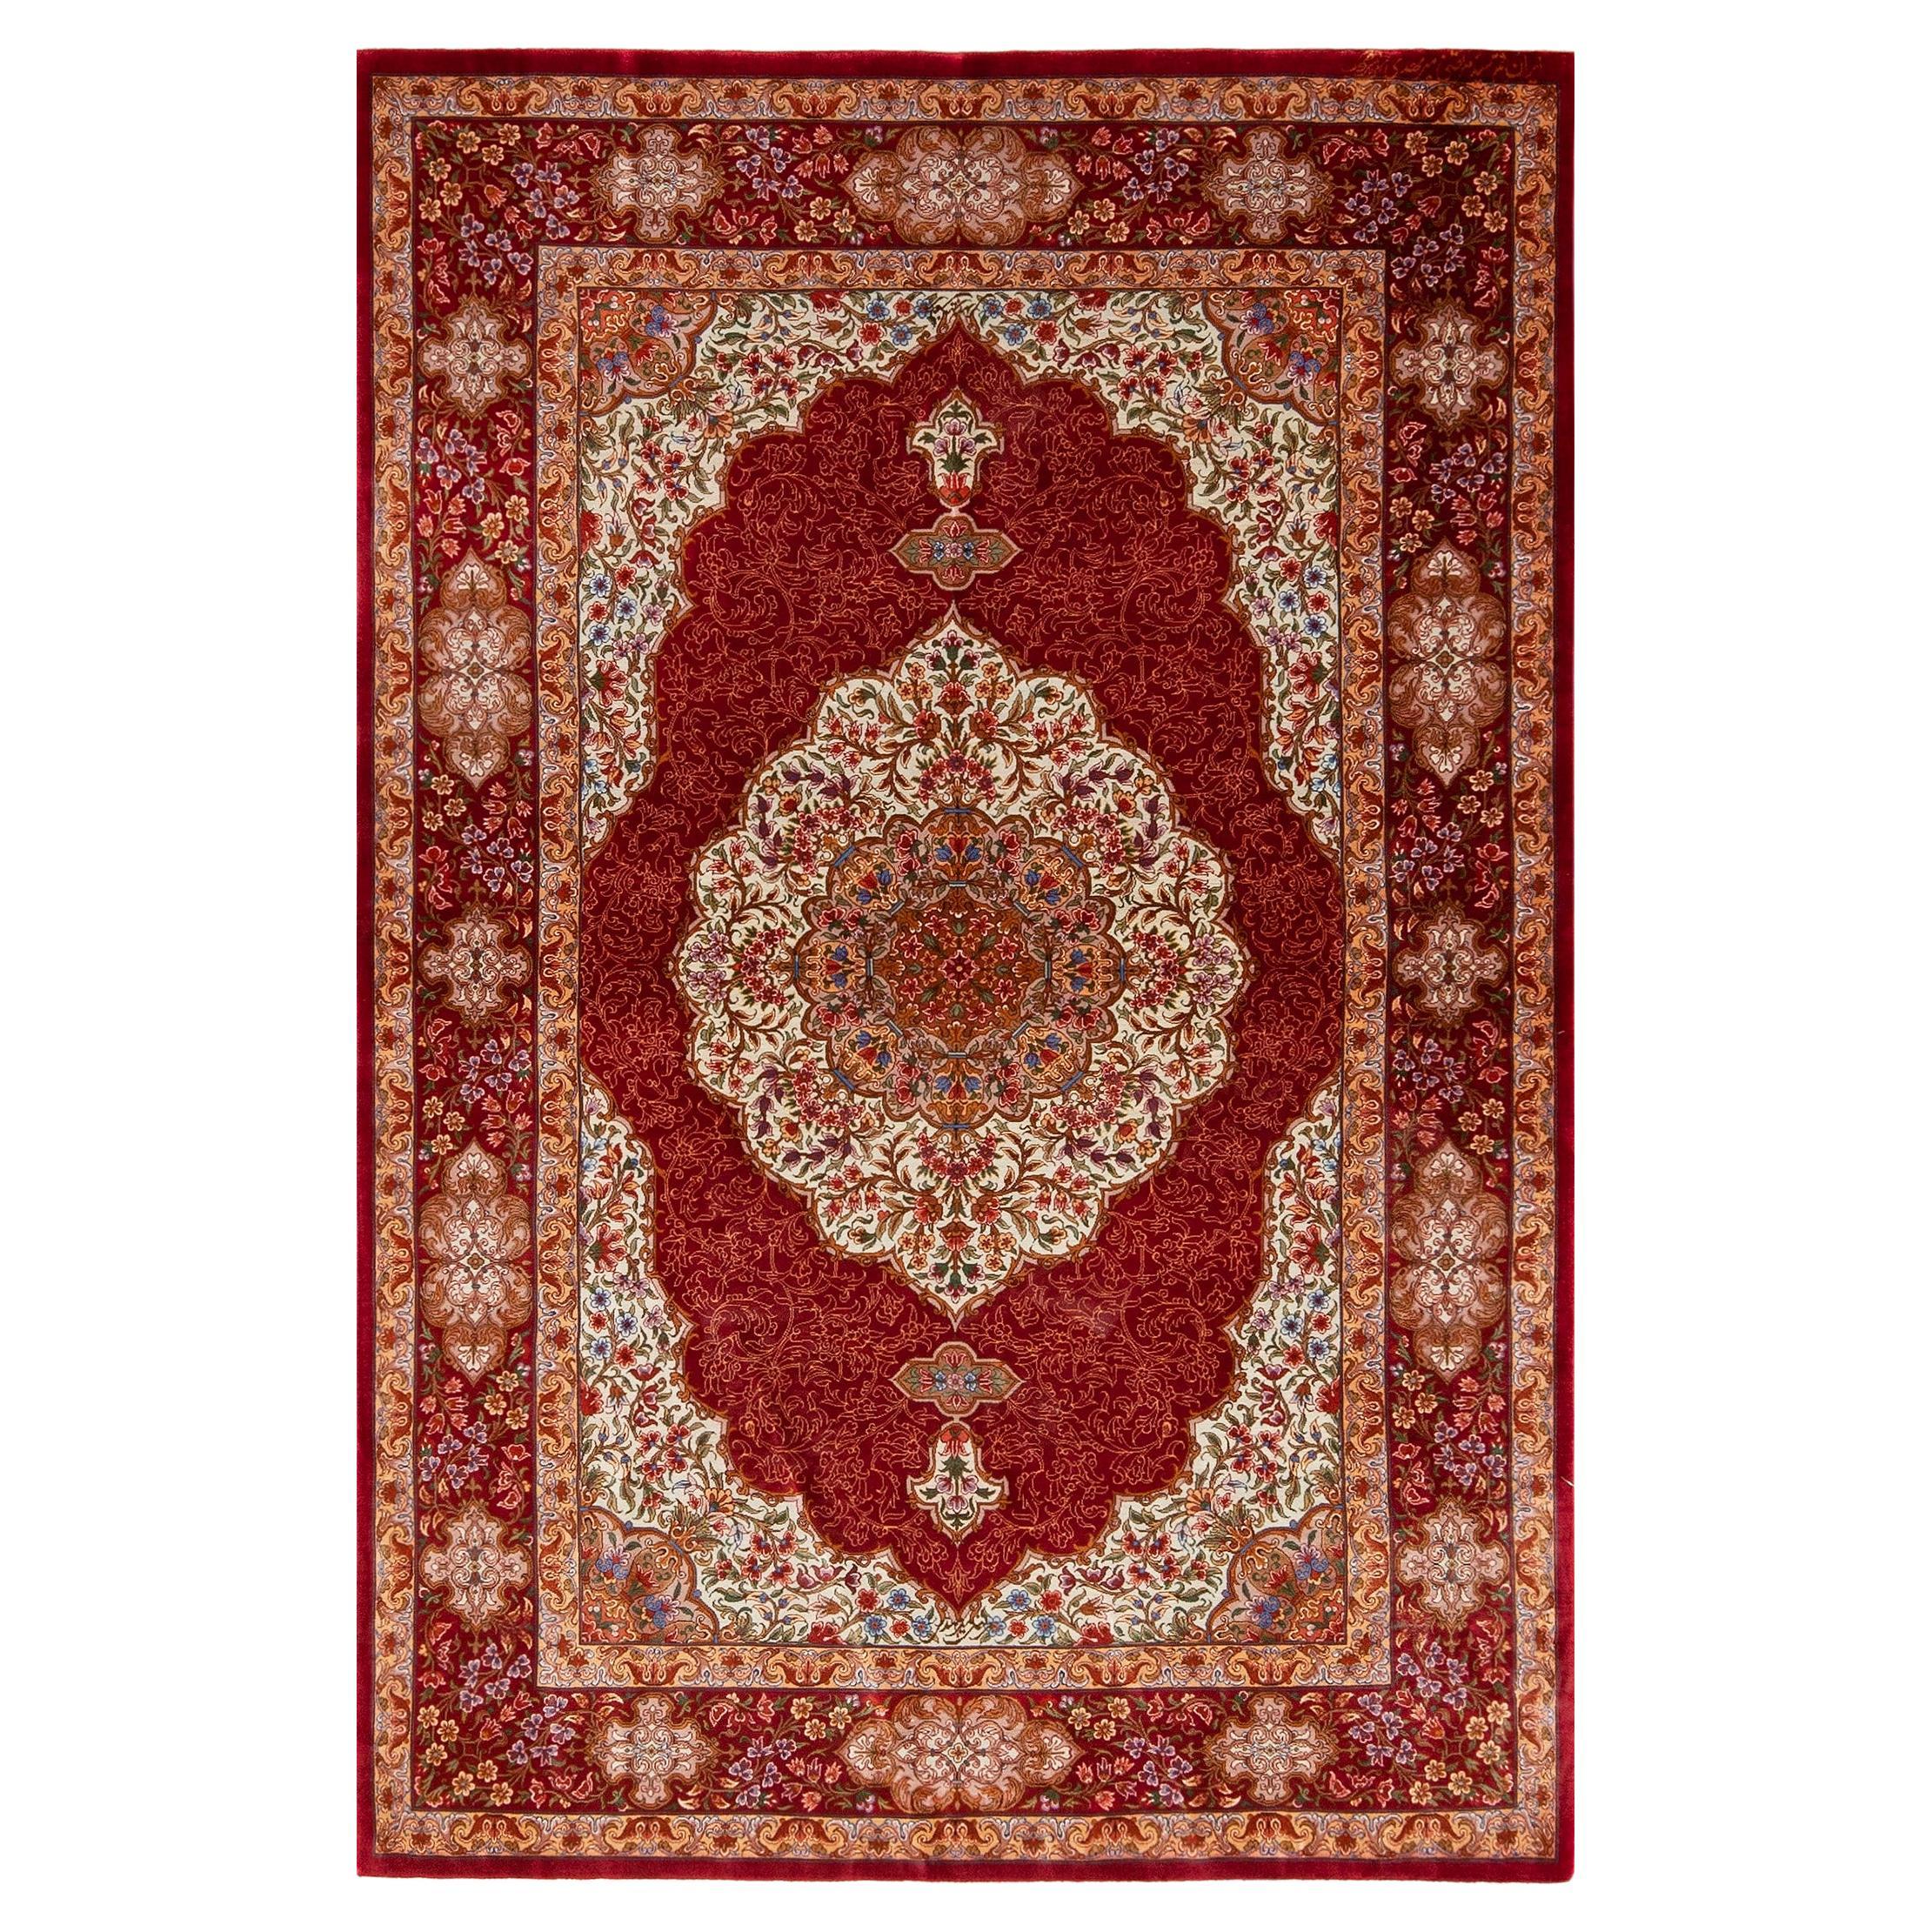 Fine Floral Small Luxurious Vintage Persian Silk Qum Rug 3'3" x 5' For Sale